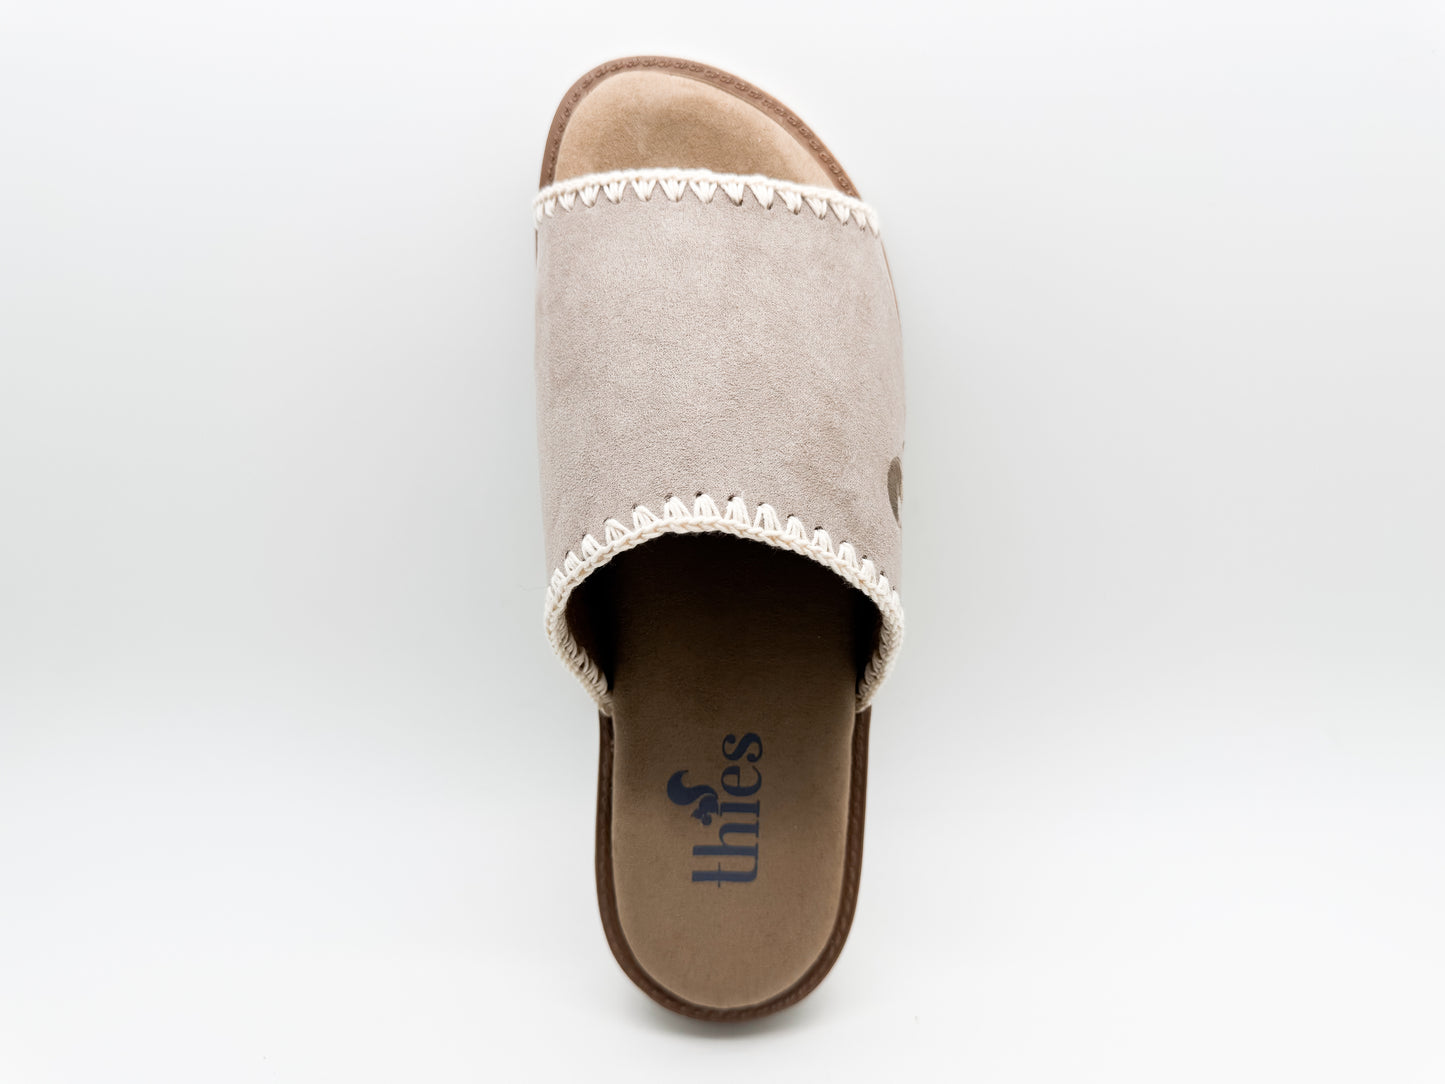 thies 1856 ® Rec Soft Woven Slide taupe (W/X)